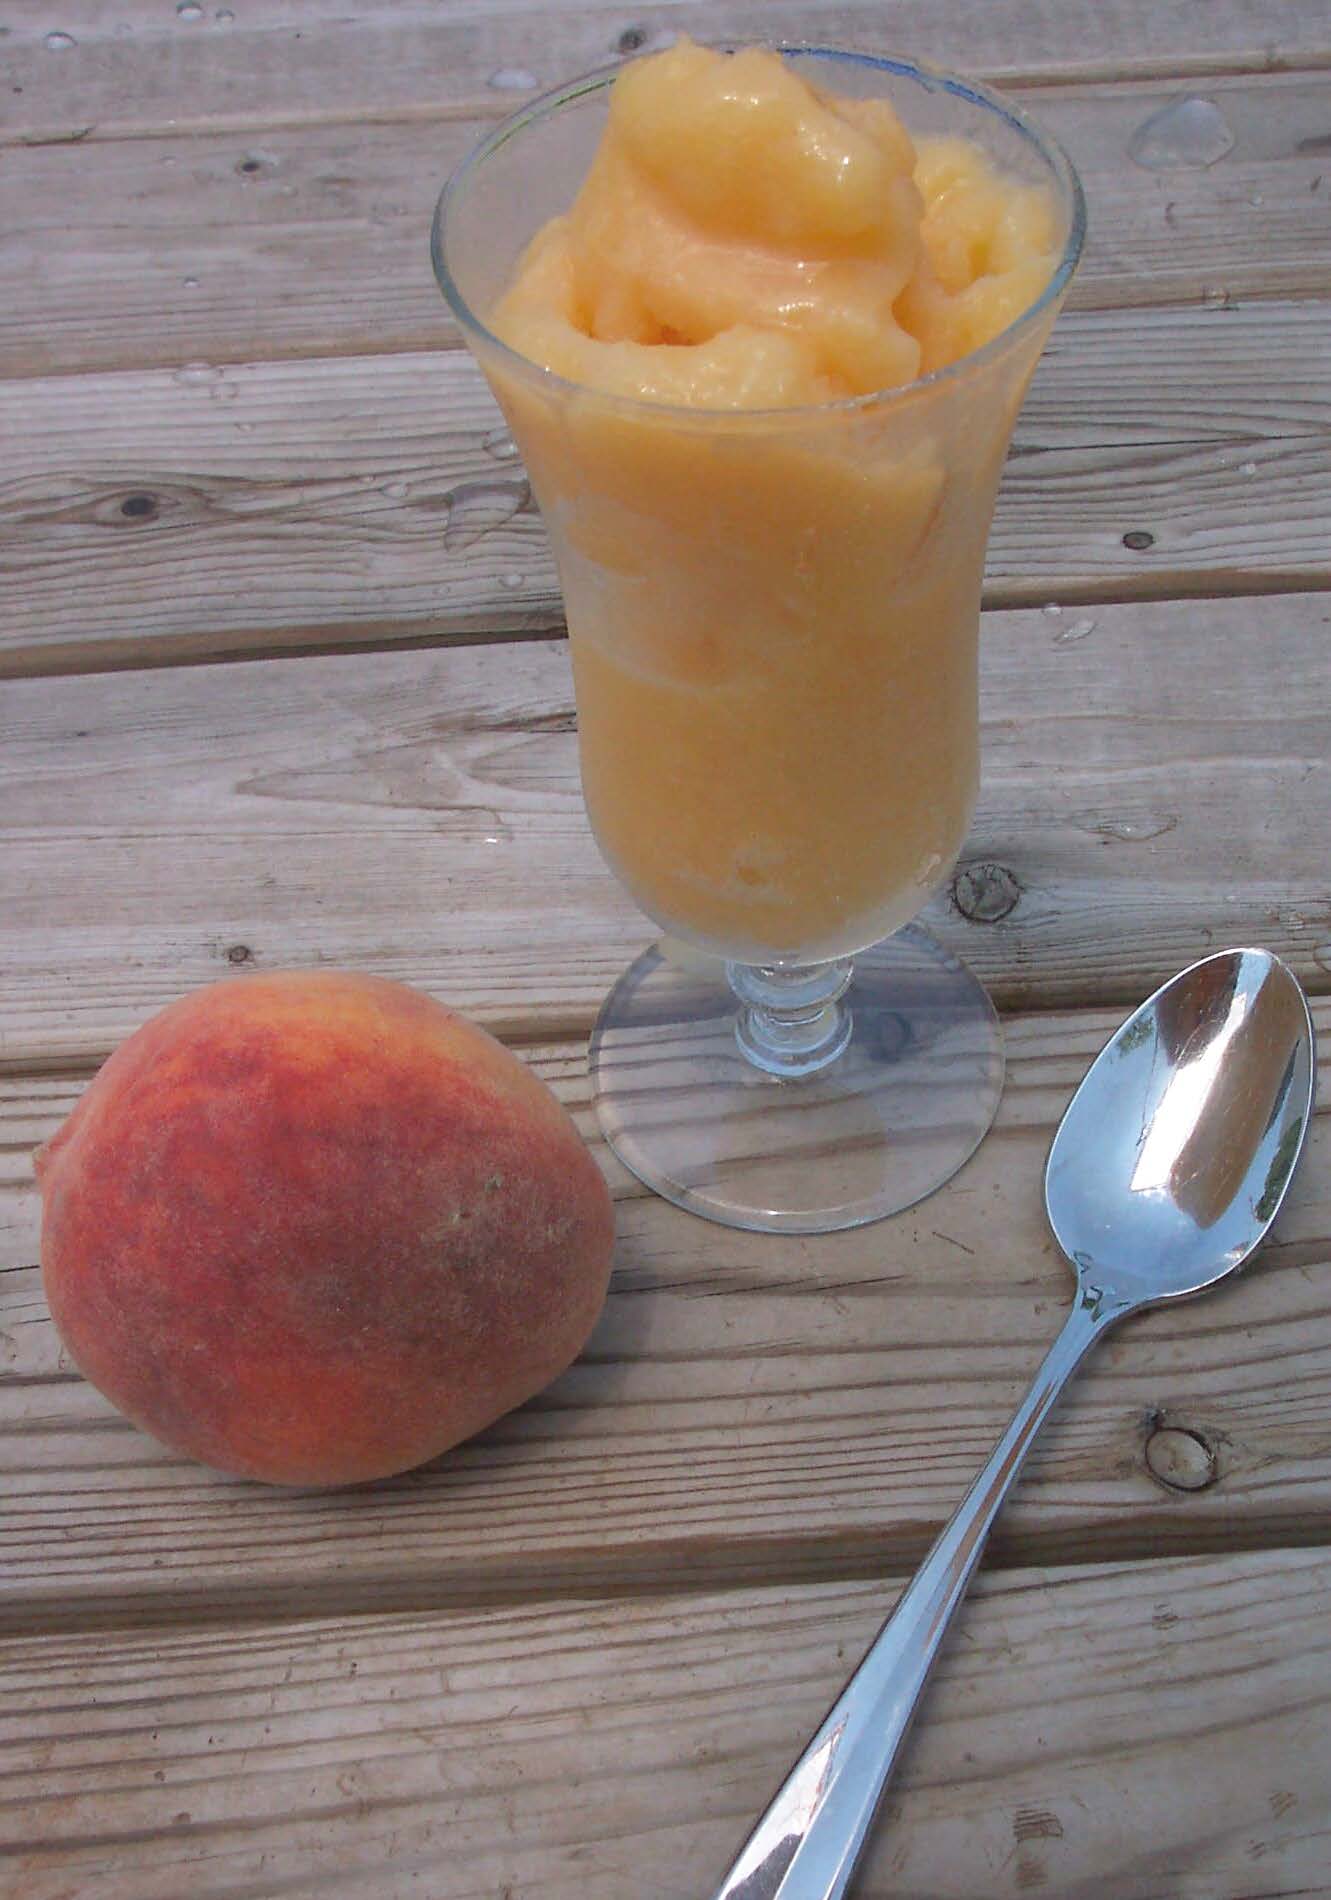 A clear glass full of orange sorbet on a wooden table with a peach next to it.